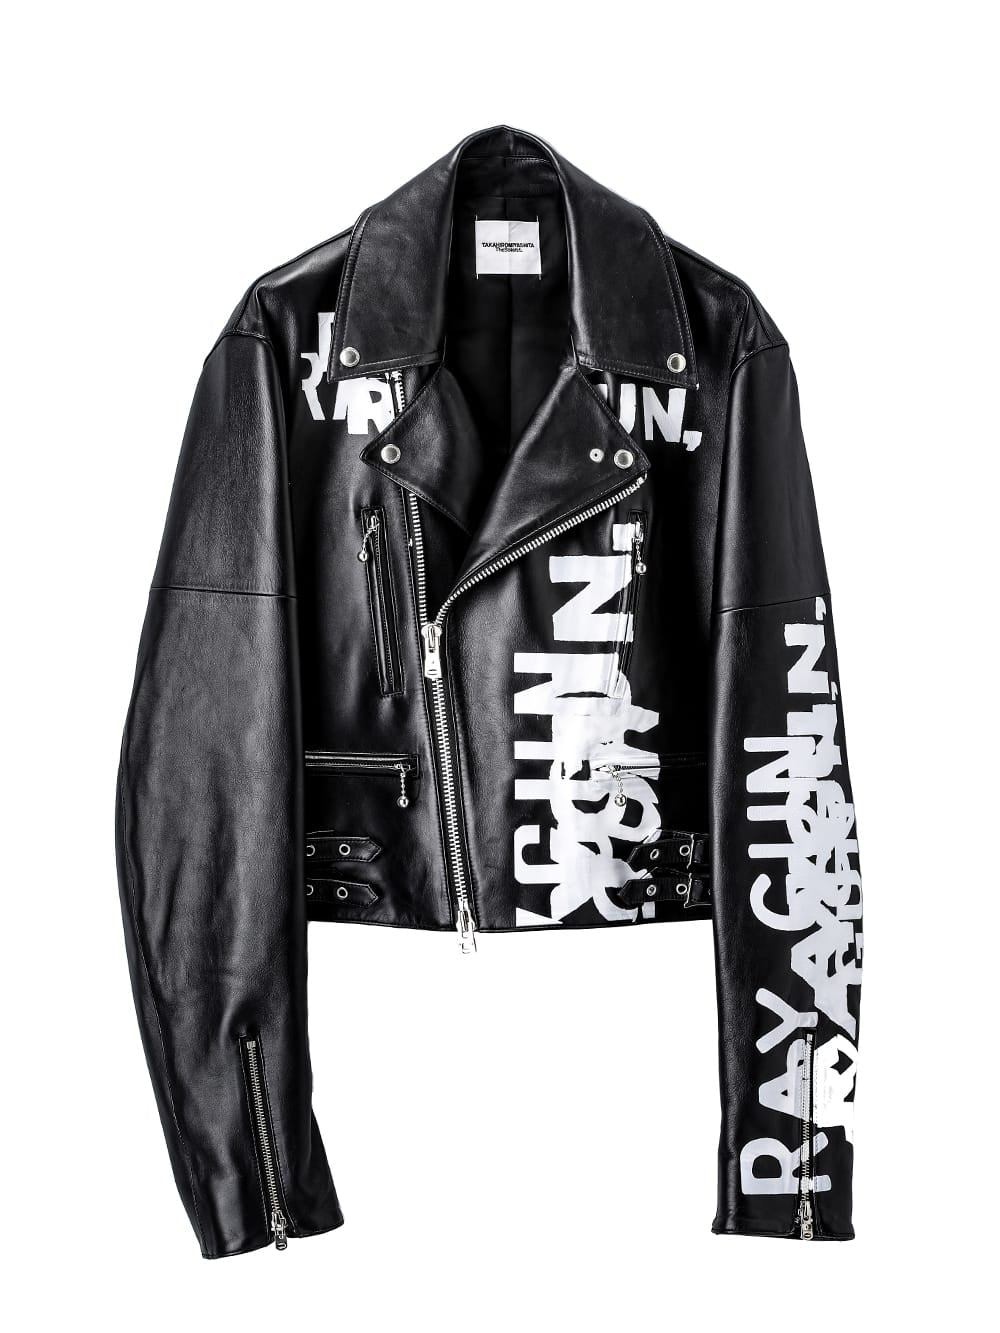 sj.0019aAW23-black two-way cropped riders jacket. THE TWO OF US ...